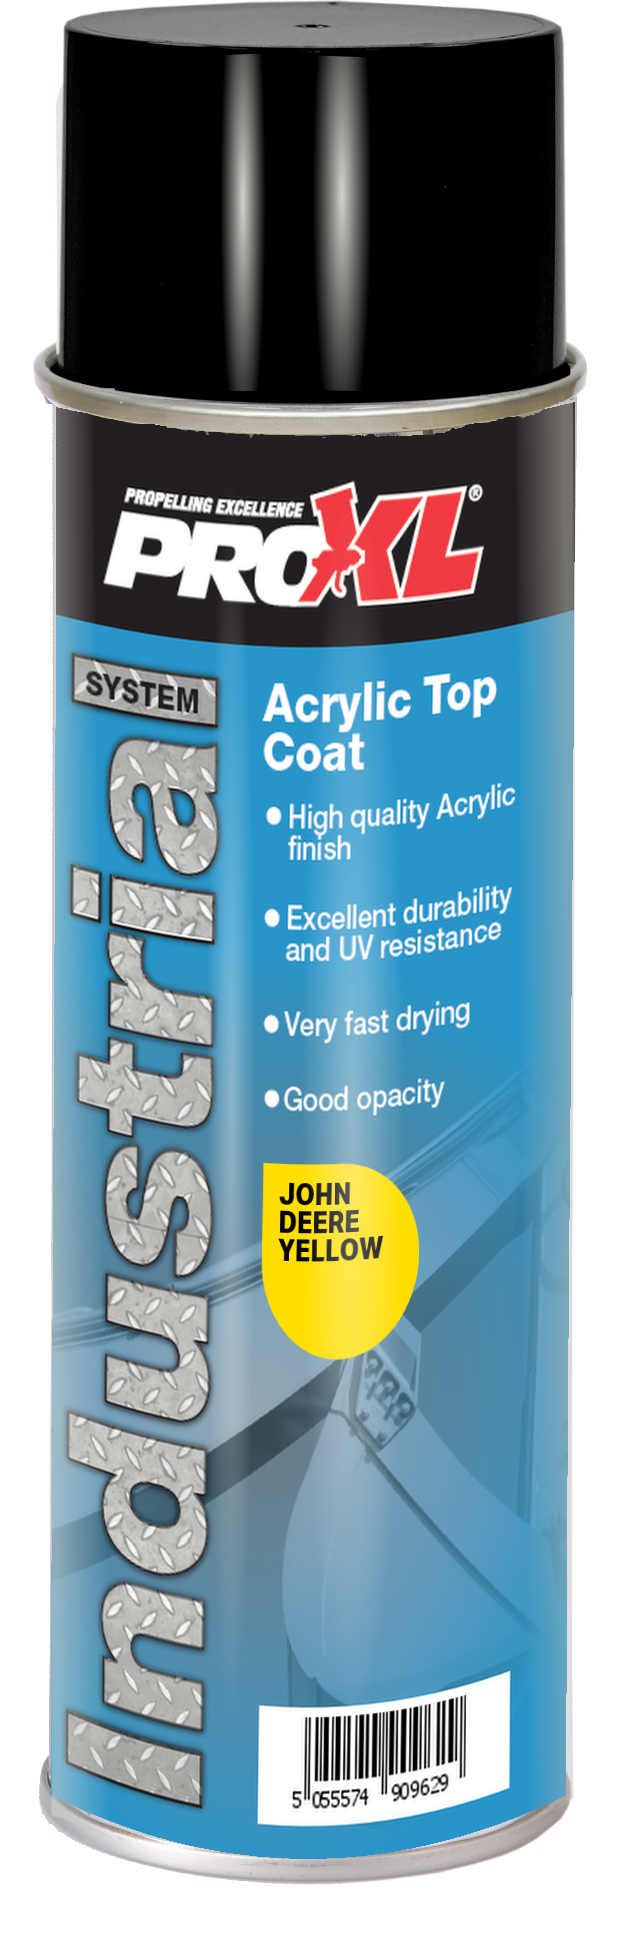 Acrylic Topcoat Aerosol – Agricultural/Construction Colours (500ml) Product Image